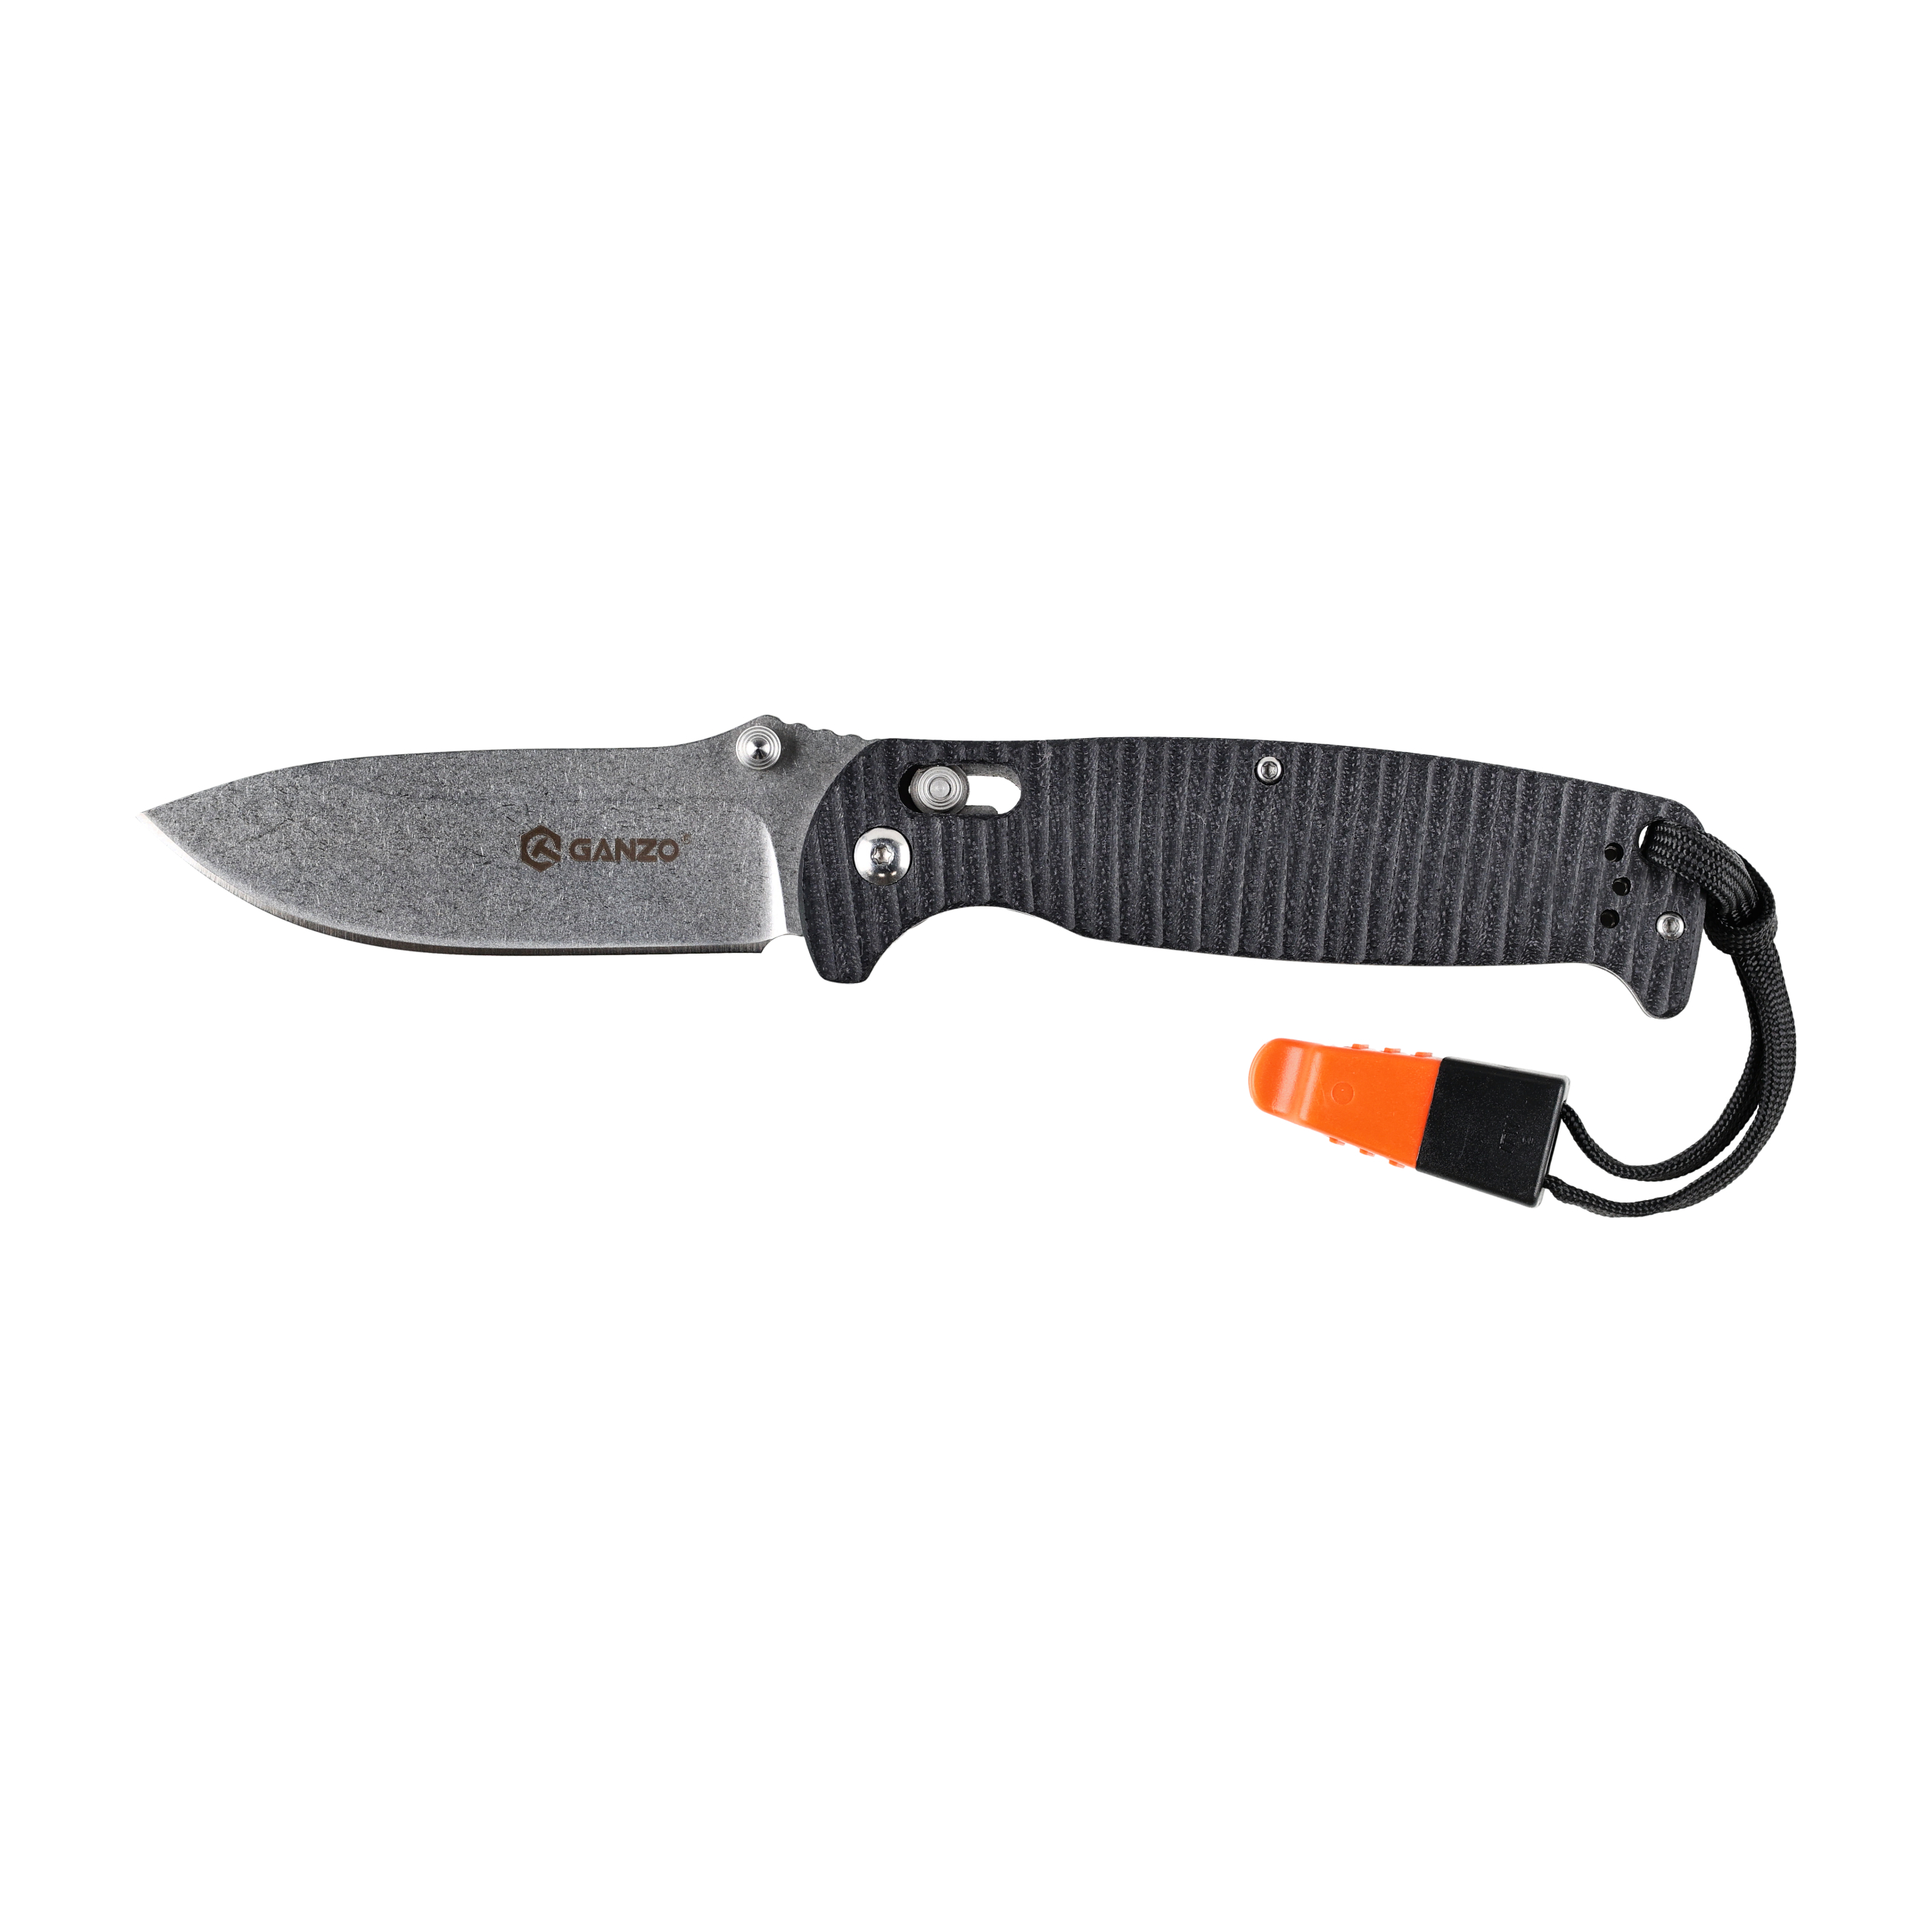 Ganzo G7412P-BK-WS folding knife with whistle. - shop